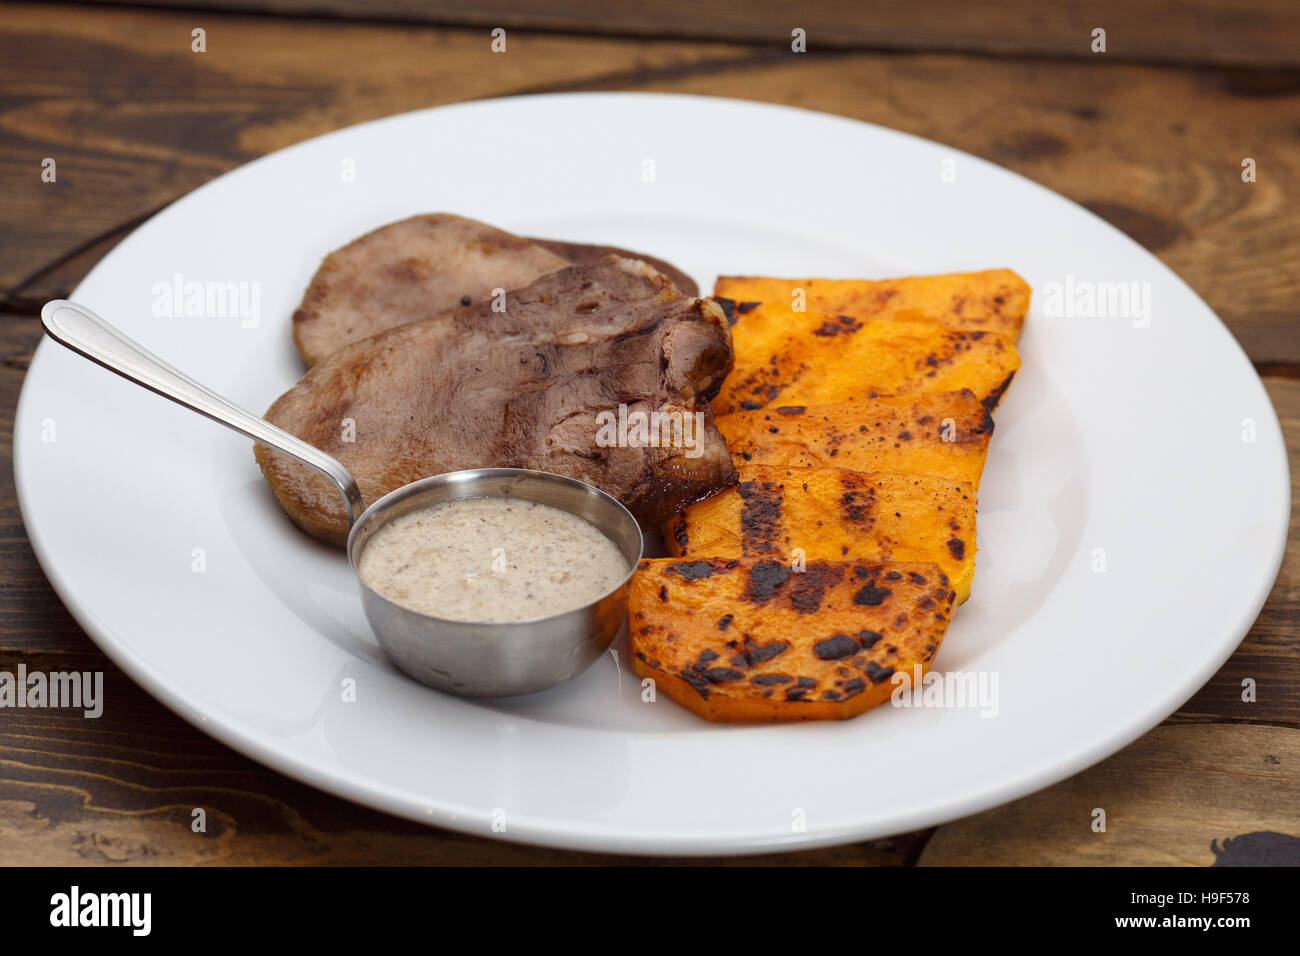 Meat tongue with sauce and pumpkin Stock Photo